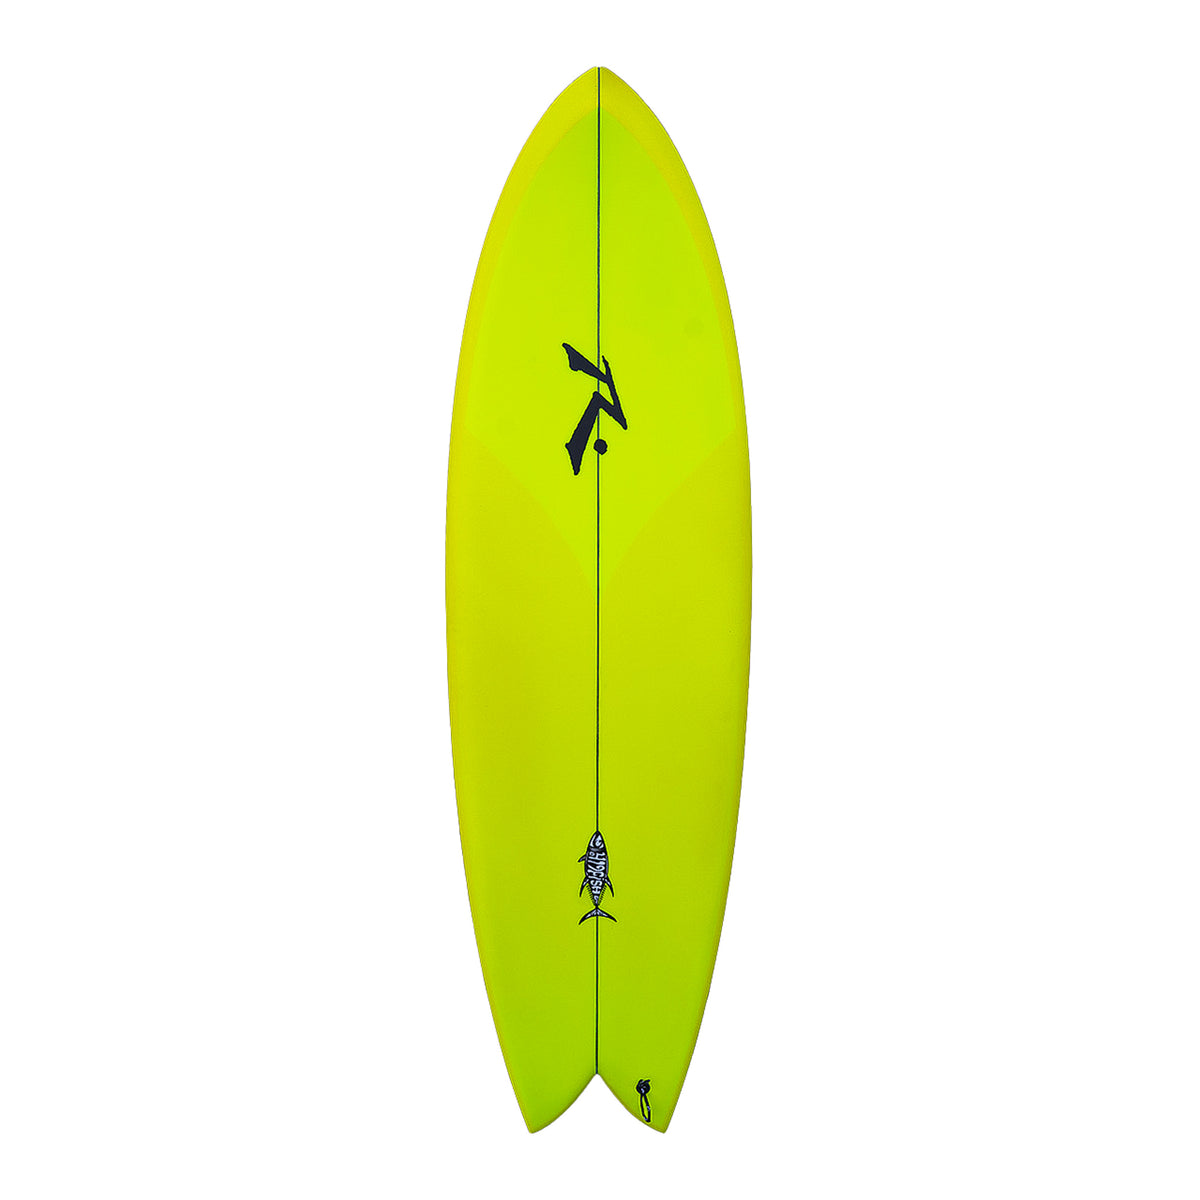 419fish - Alternative - Rusty Surfboards - Top View - Yellow